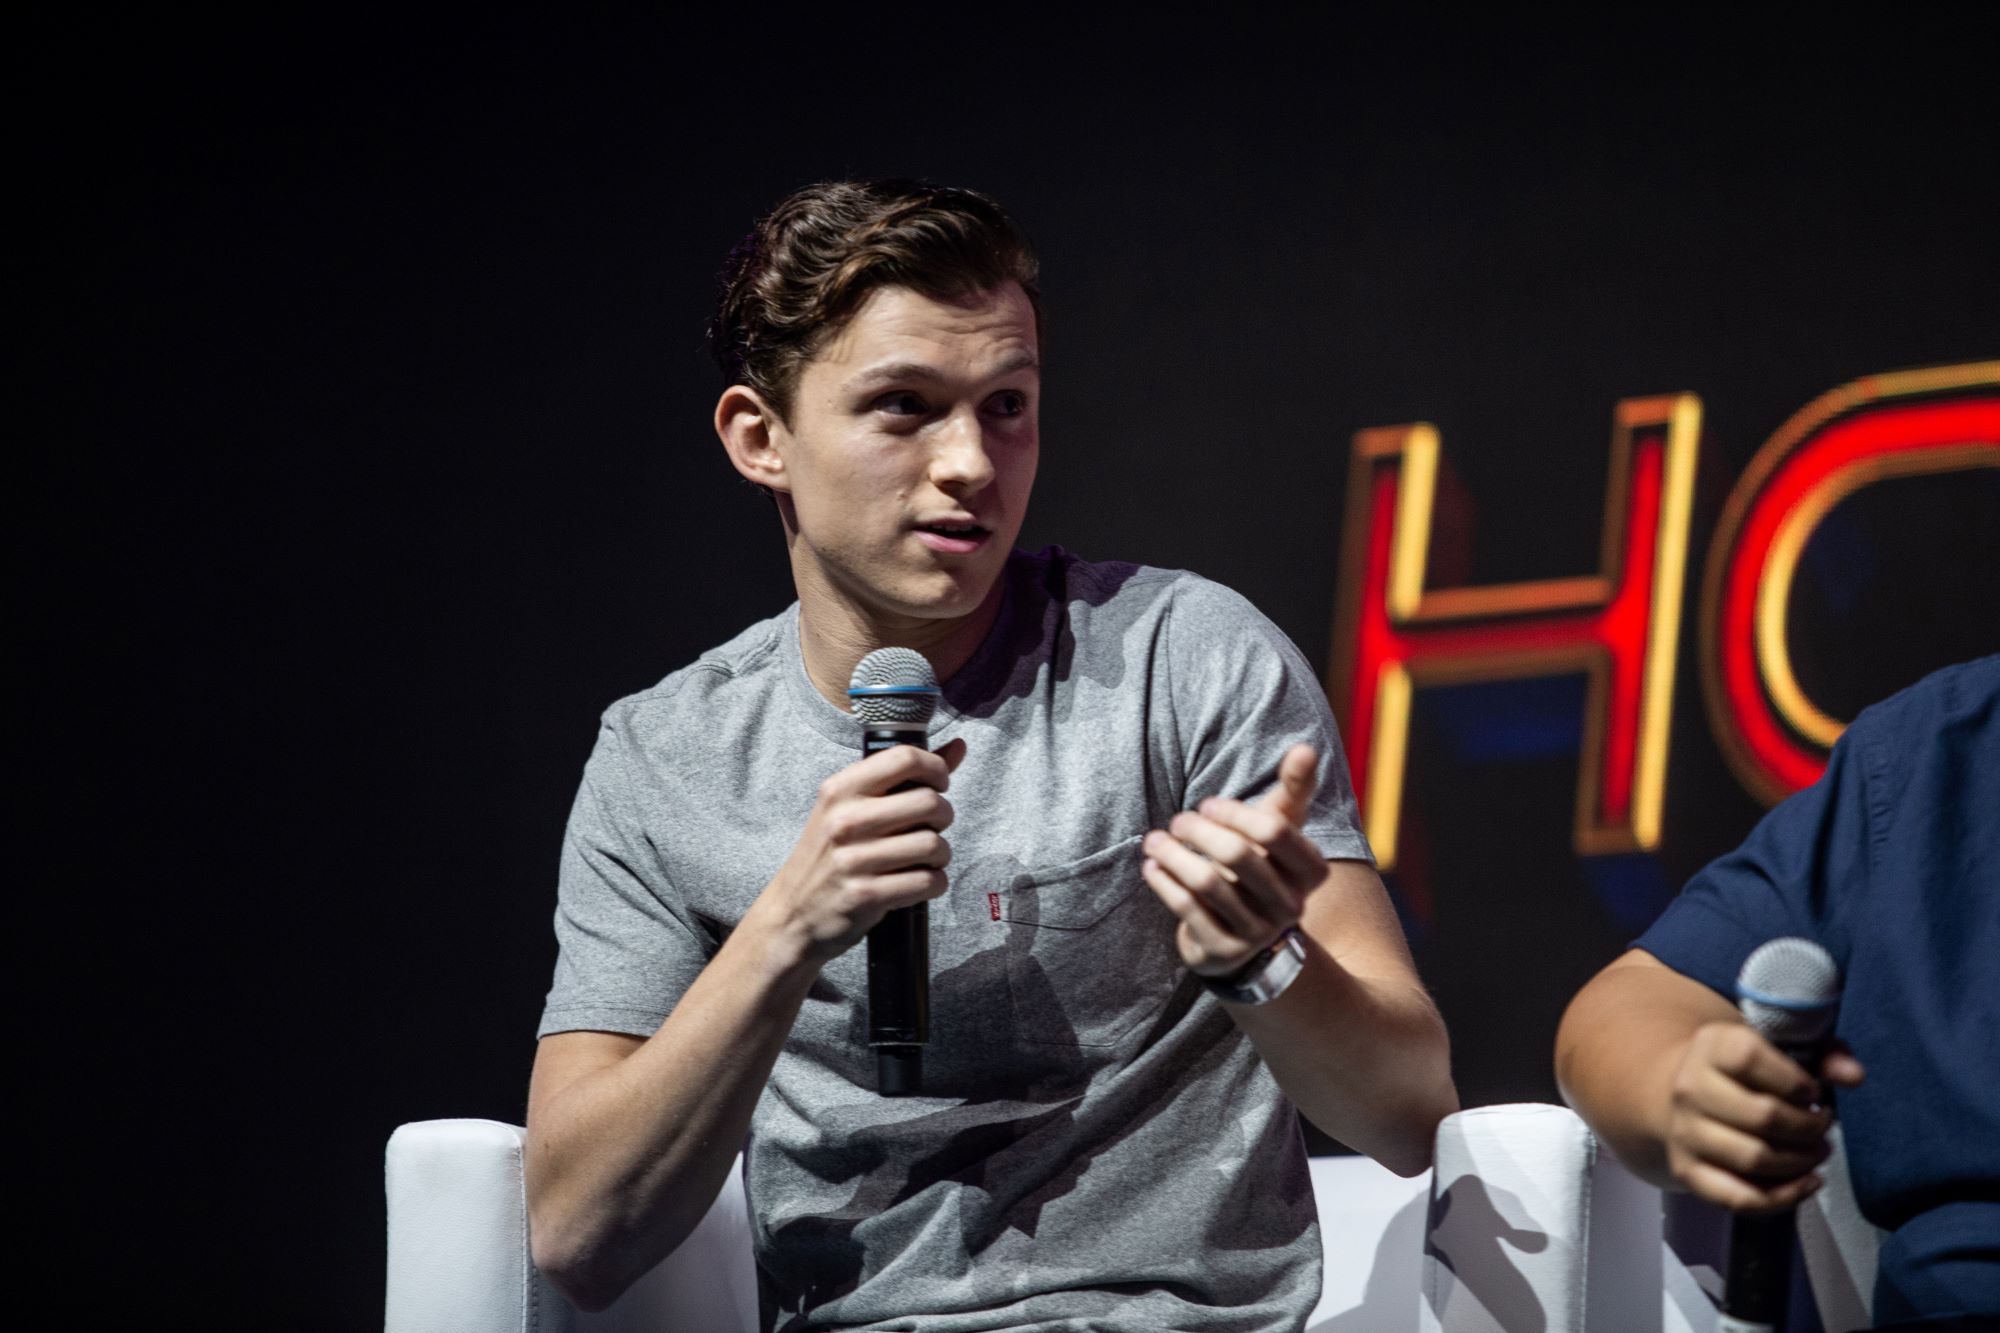 'Spider-Man: No Way Home' star Tom Holland wears a gray t-shirt and speaks into a microphone.